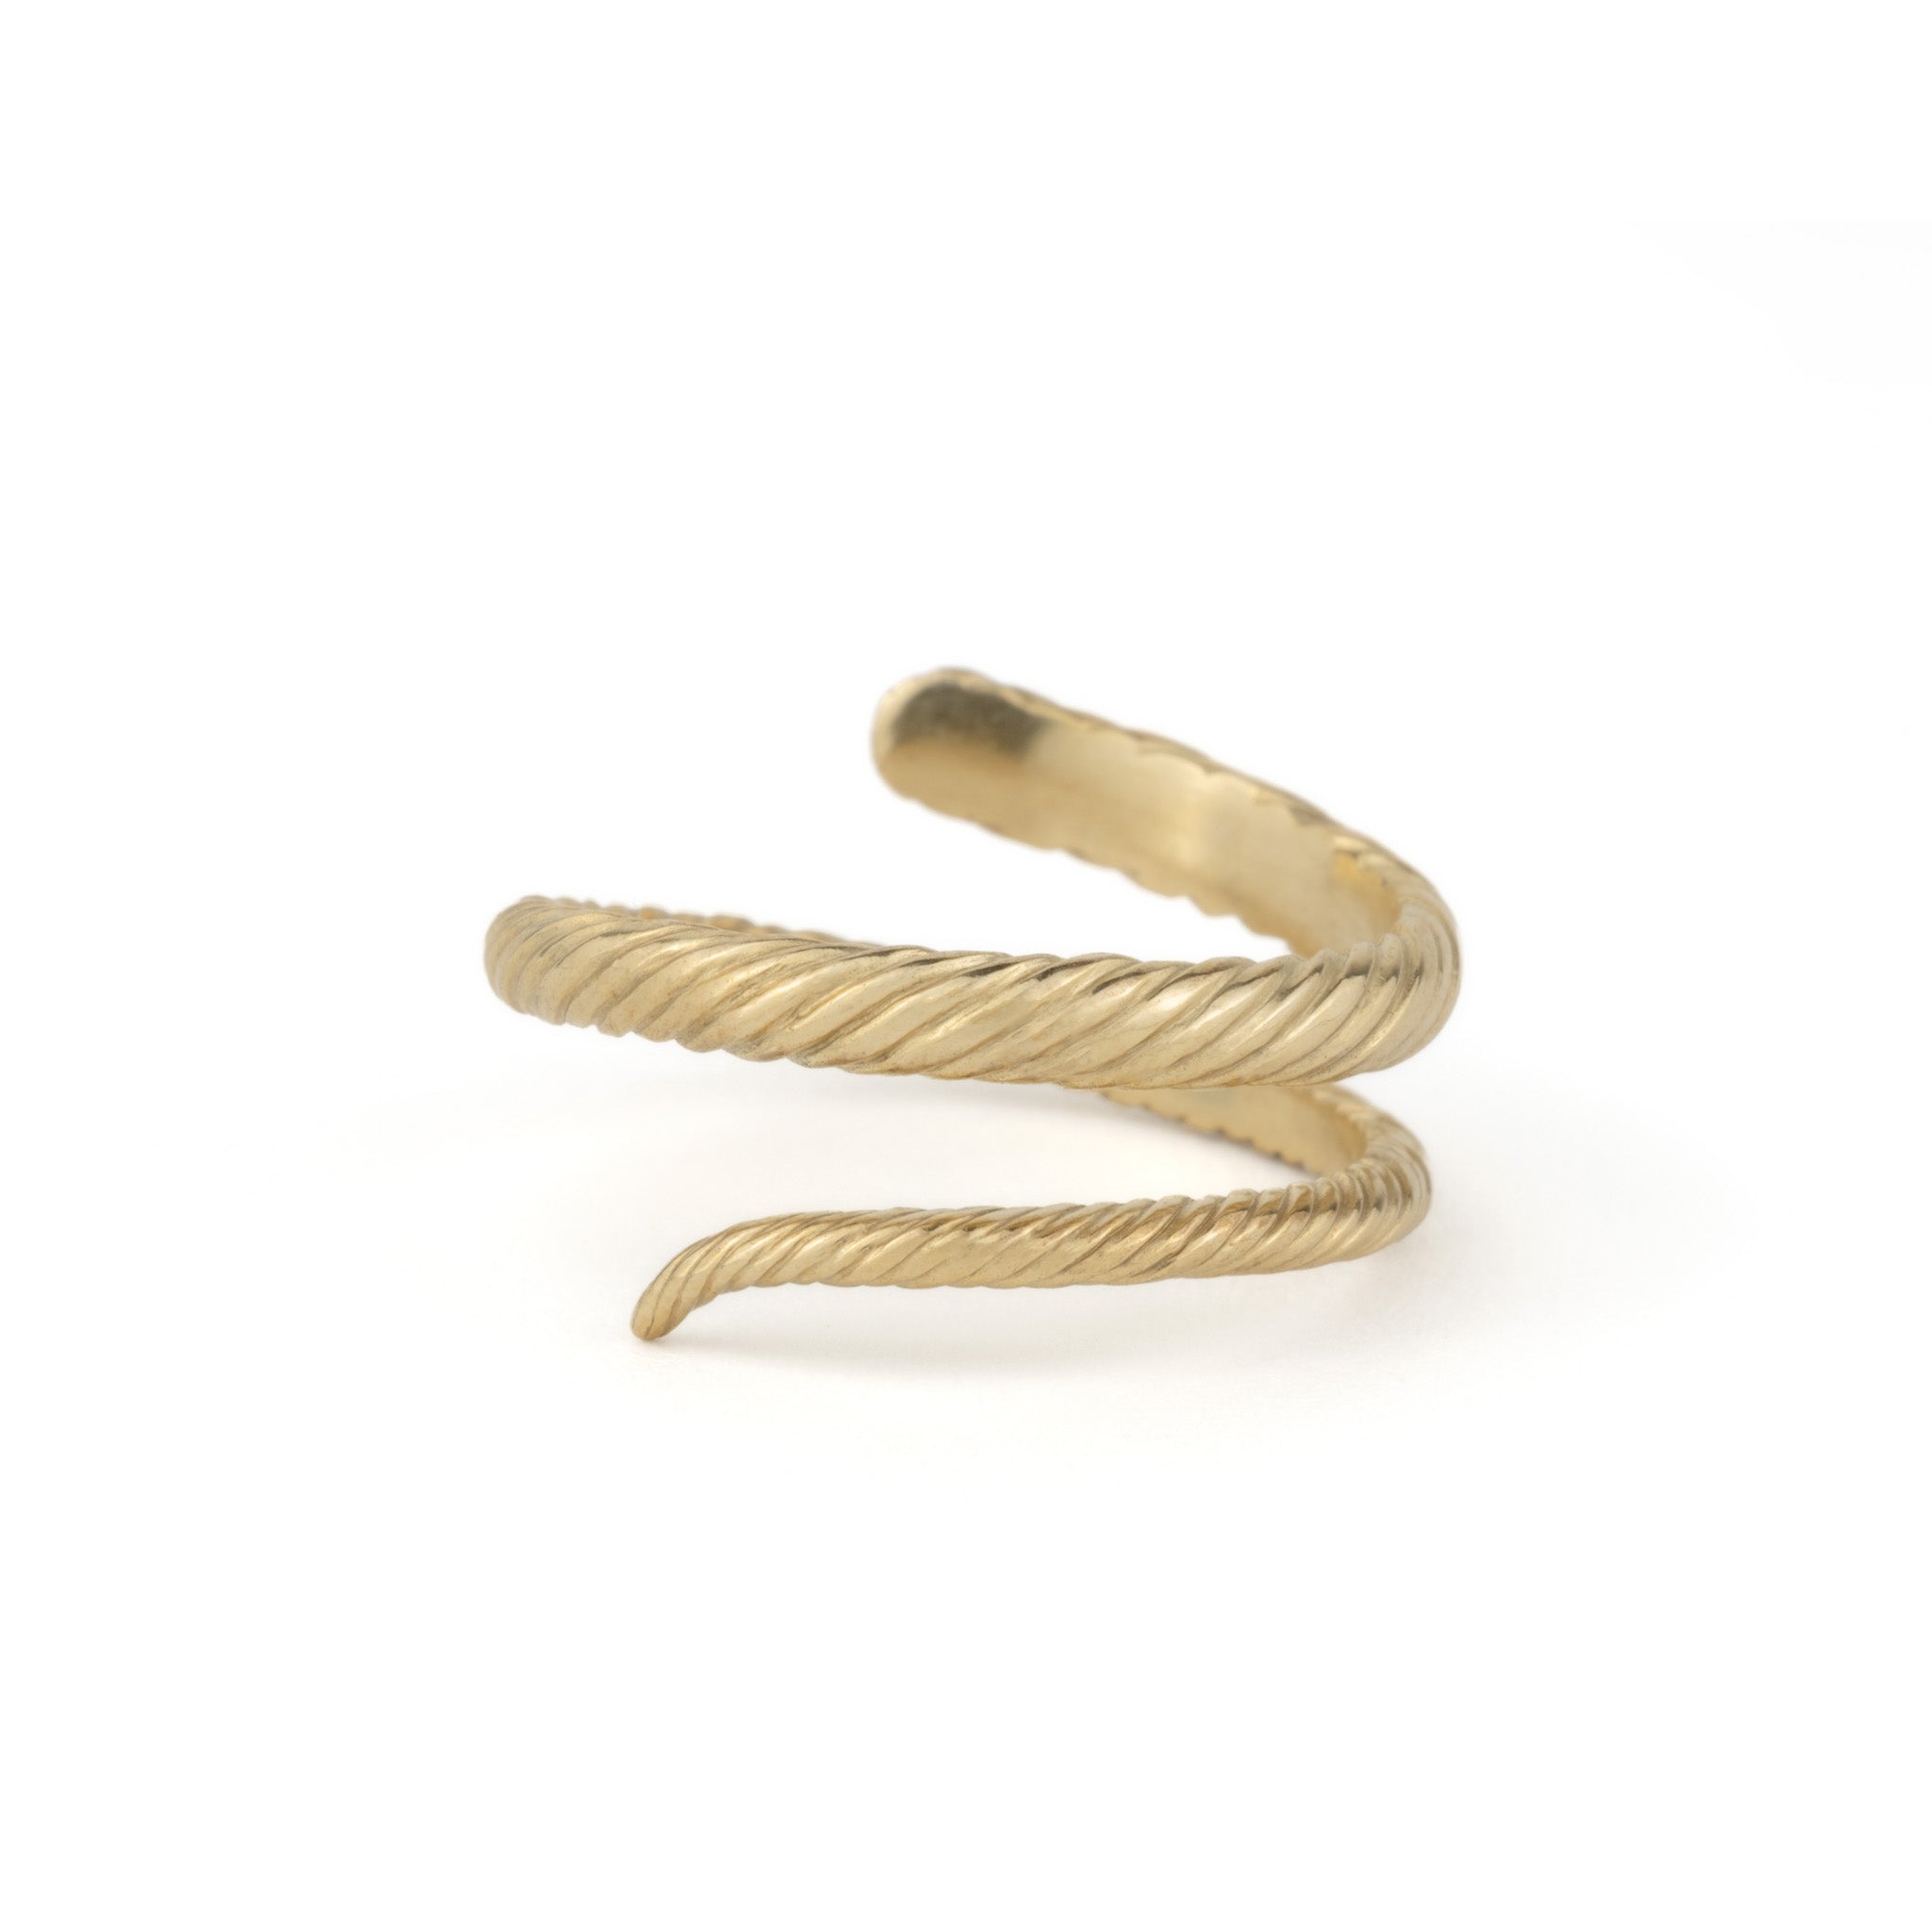 An Aiden Jae Banyan Wrap Ring with a twisted design.